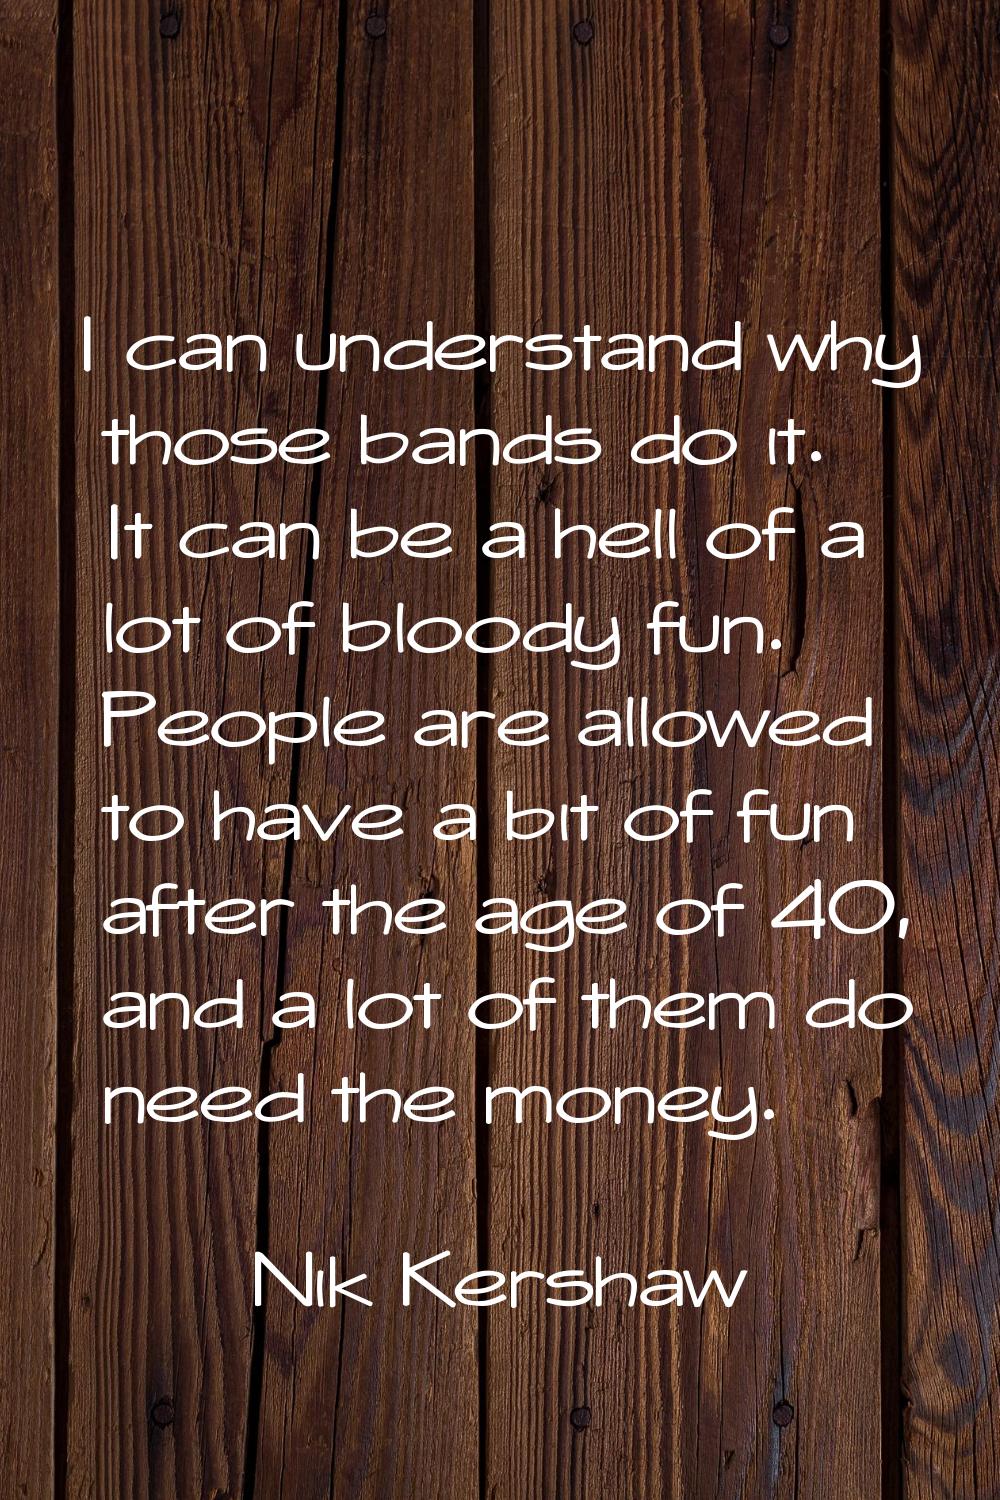 I can understand why those bands do it. It can be a hell of a lot of bloody fun. People are allowed